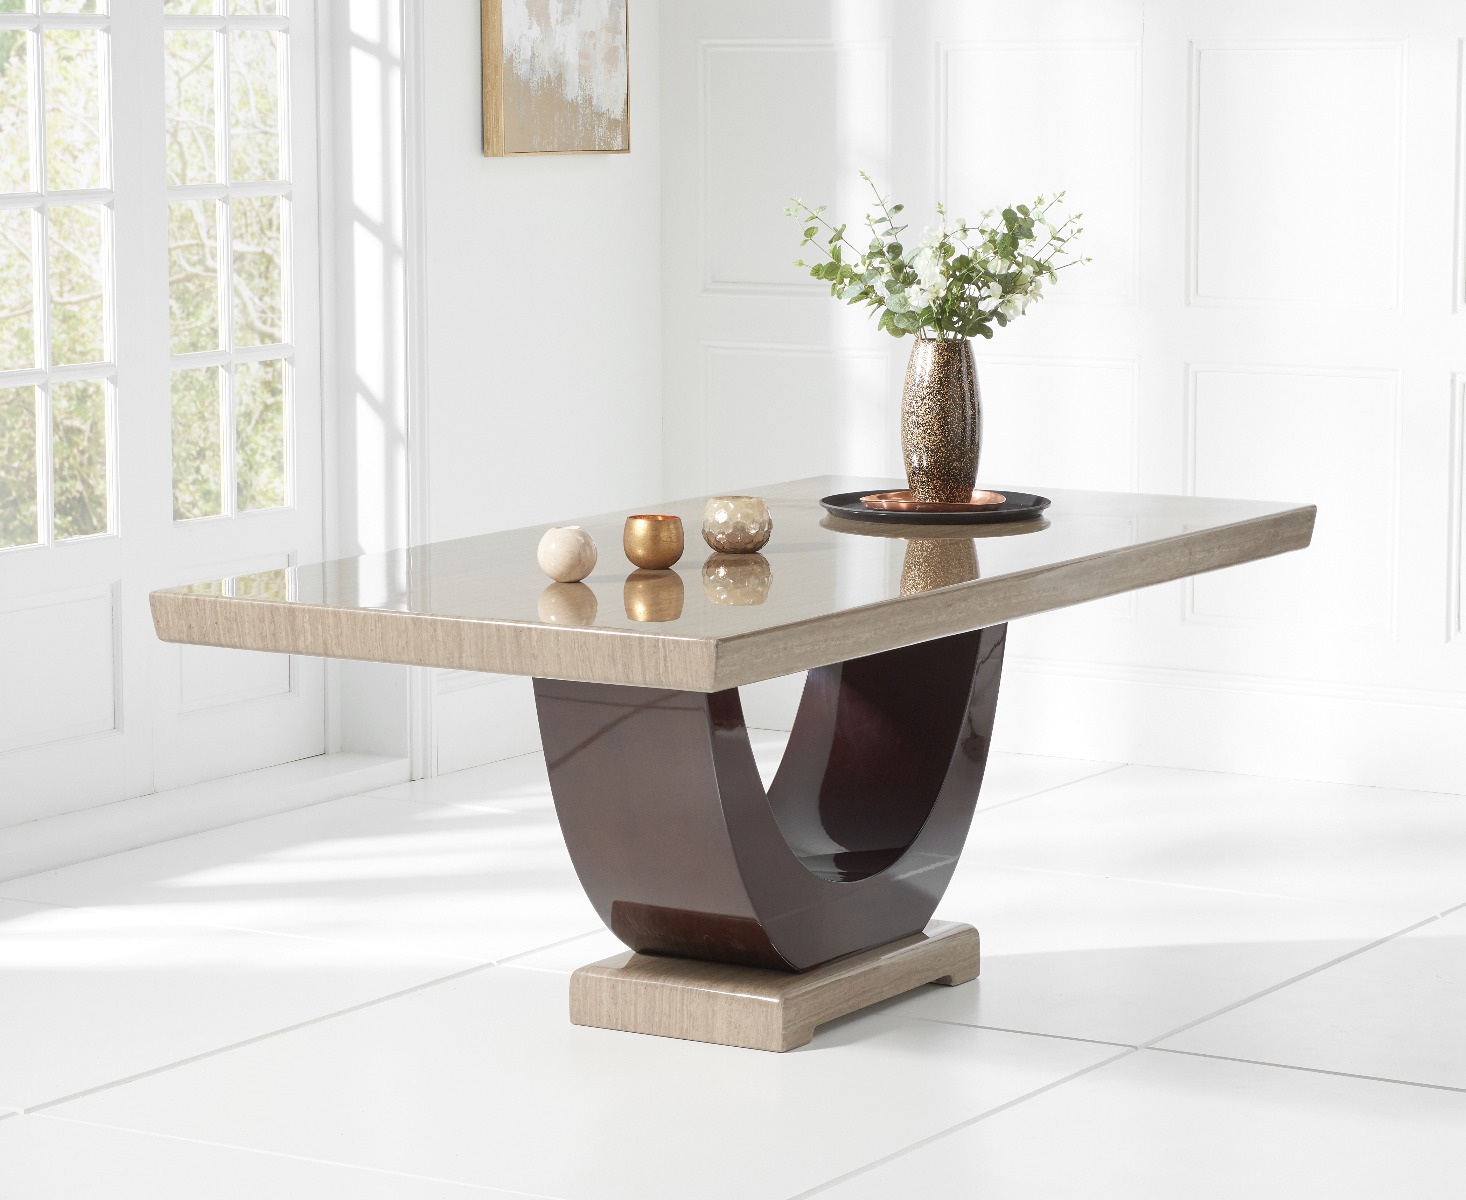 Photo 2 of Novara 200cm brown pedestal marble dining table with 10 brown alpine chairs